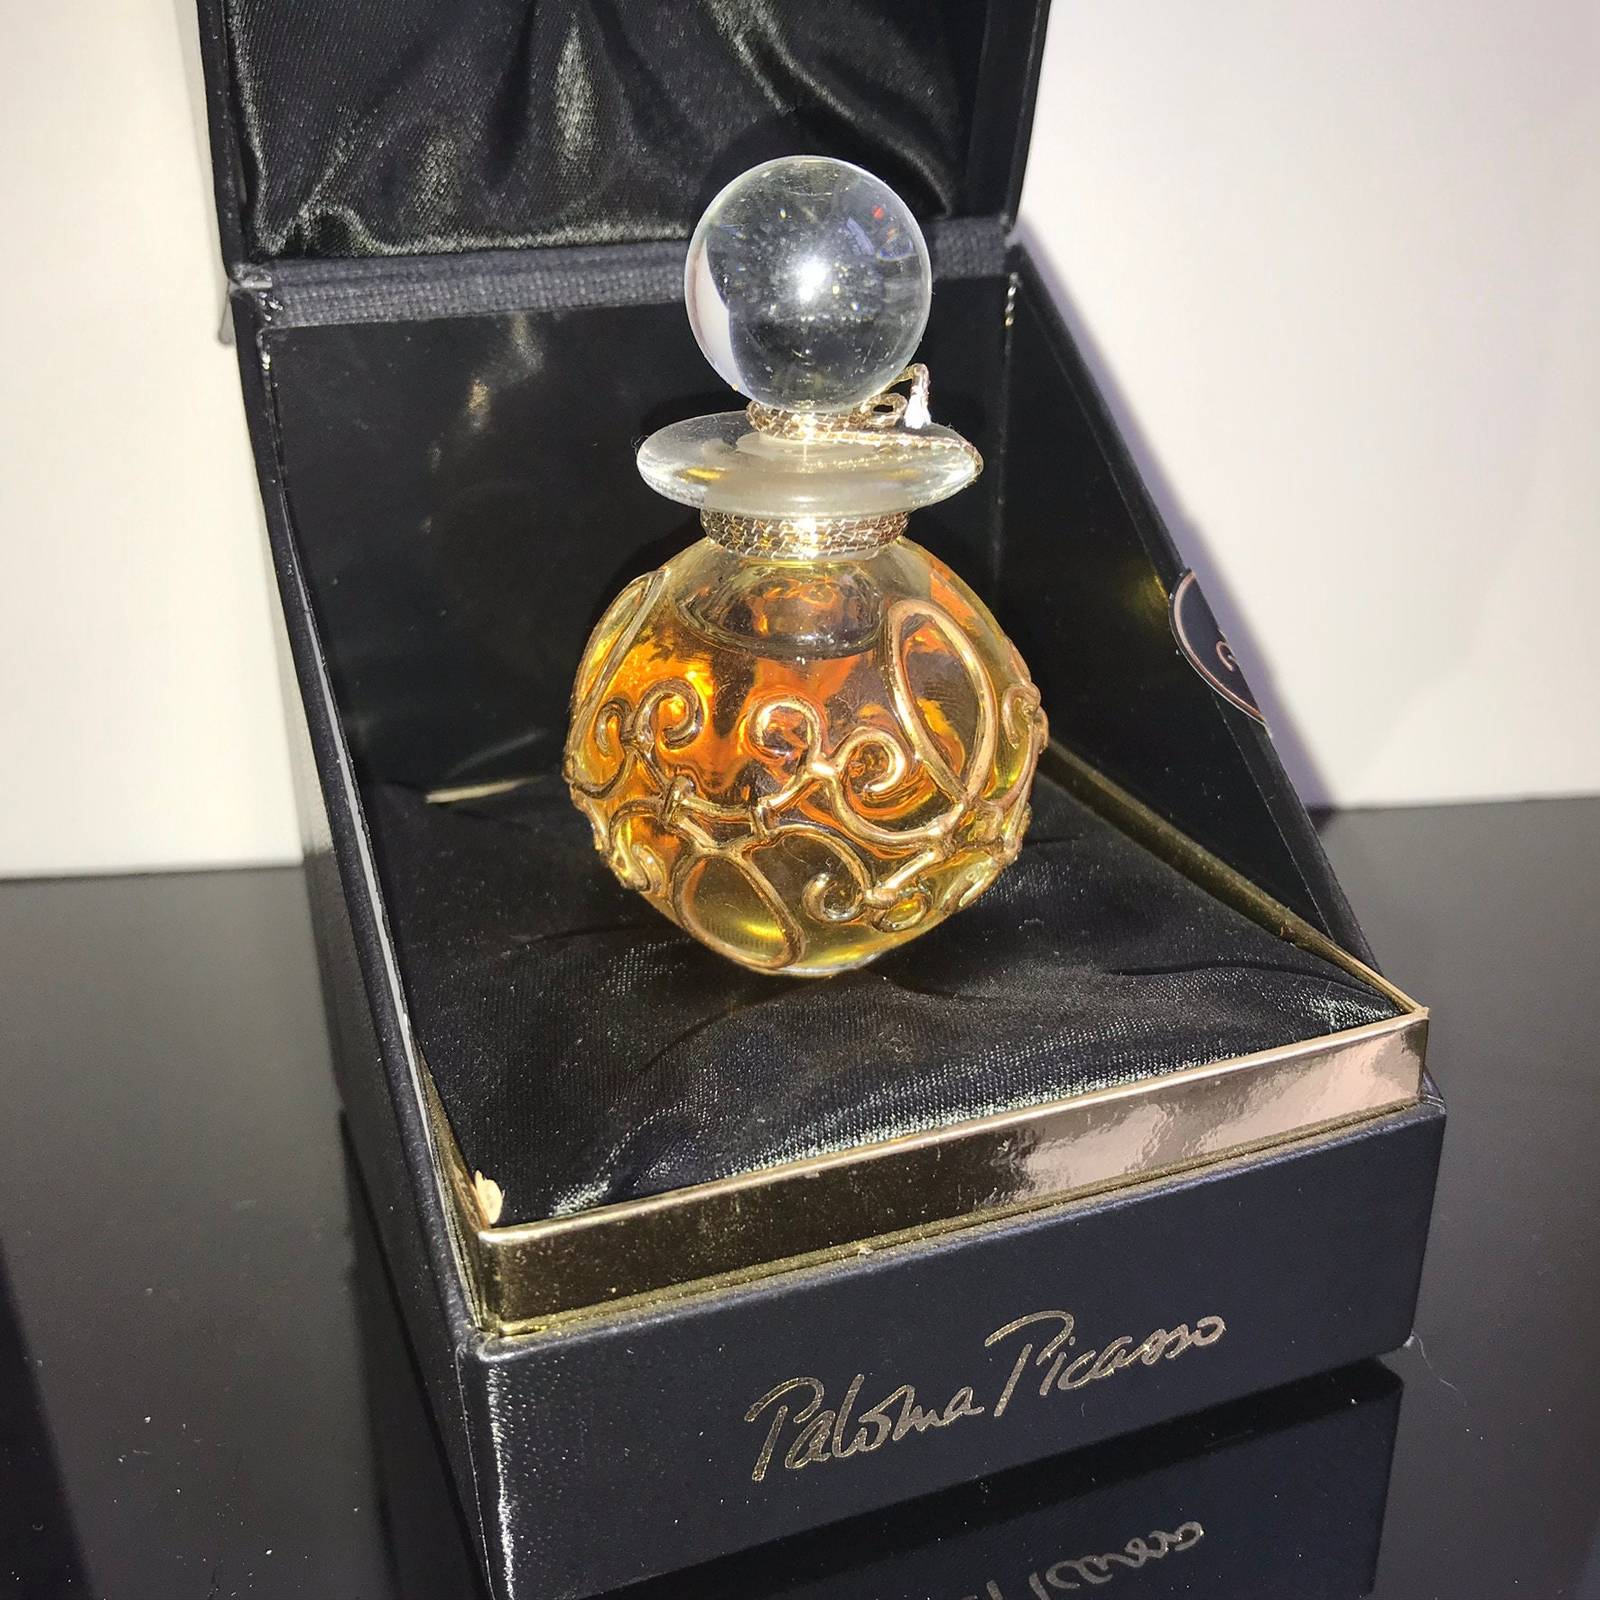 Paloma Picasso Elixir of Perfume (1984) 7 ml - LUXURY, RARITY, VINTAGE only 7,00 - $333.00